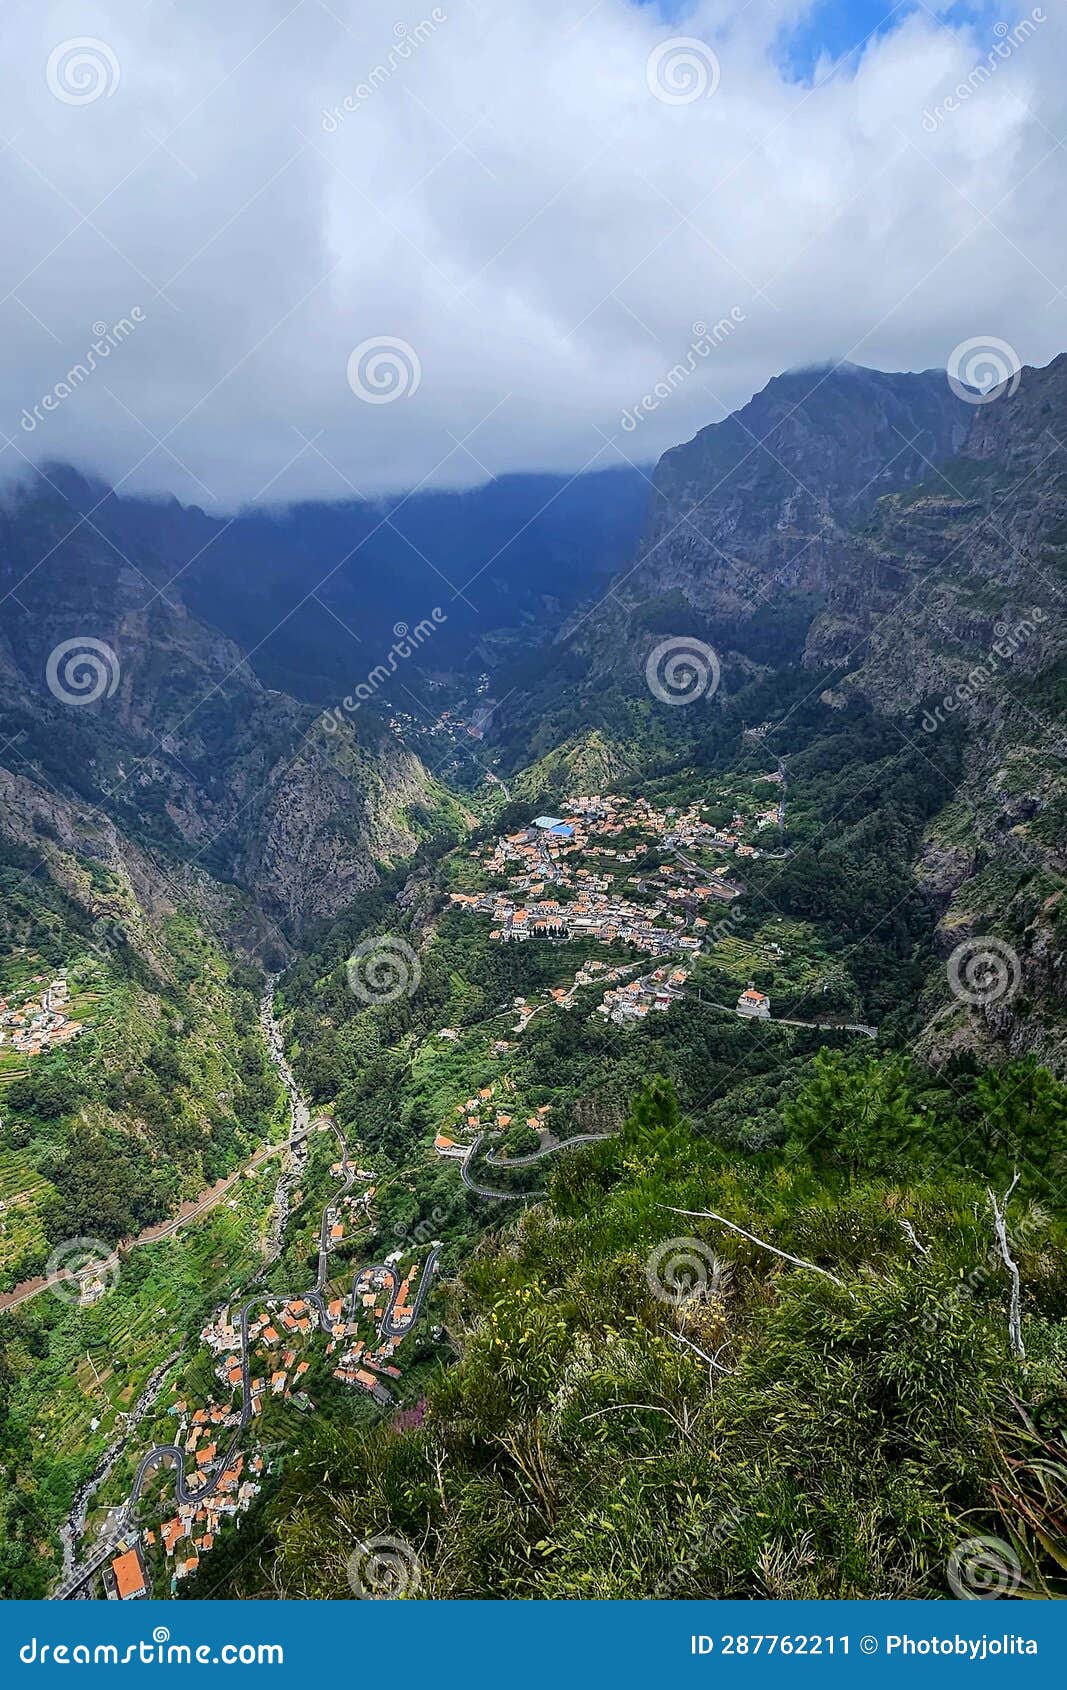 amazing panoramic madeira mountains landscape view